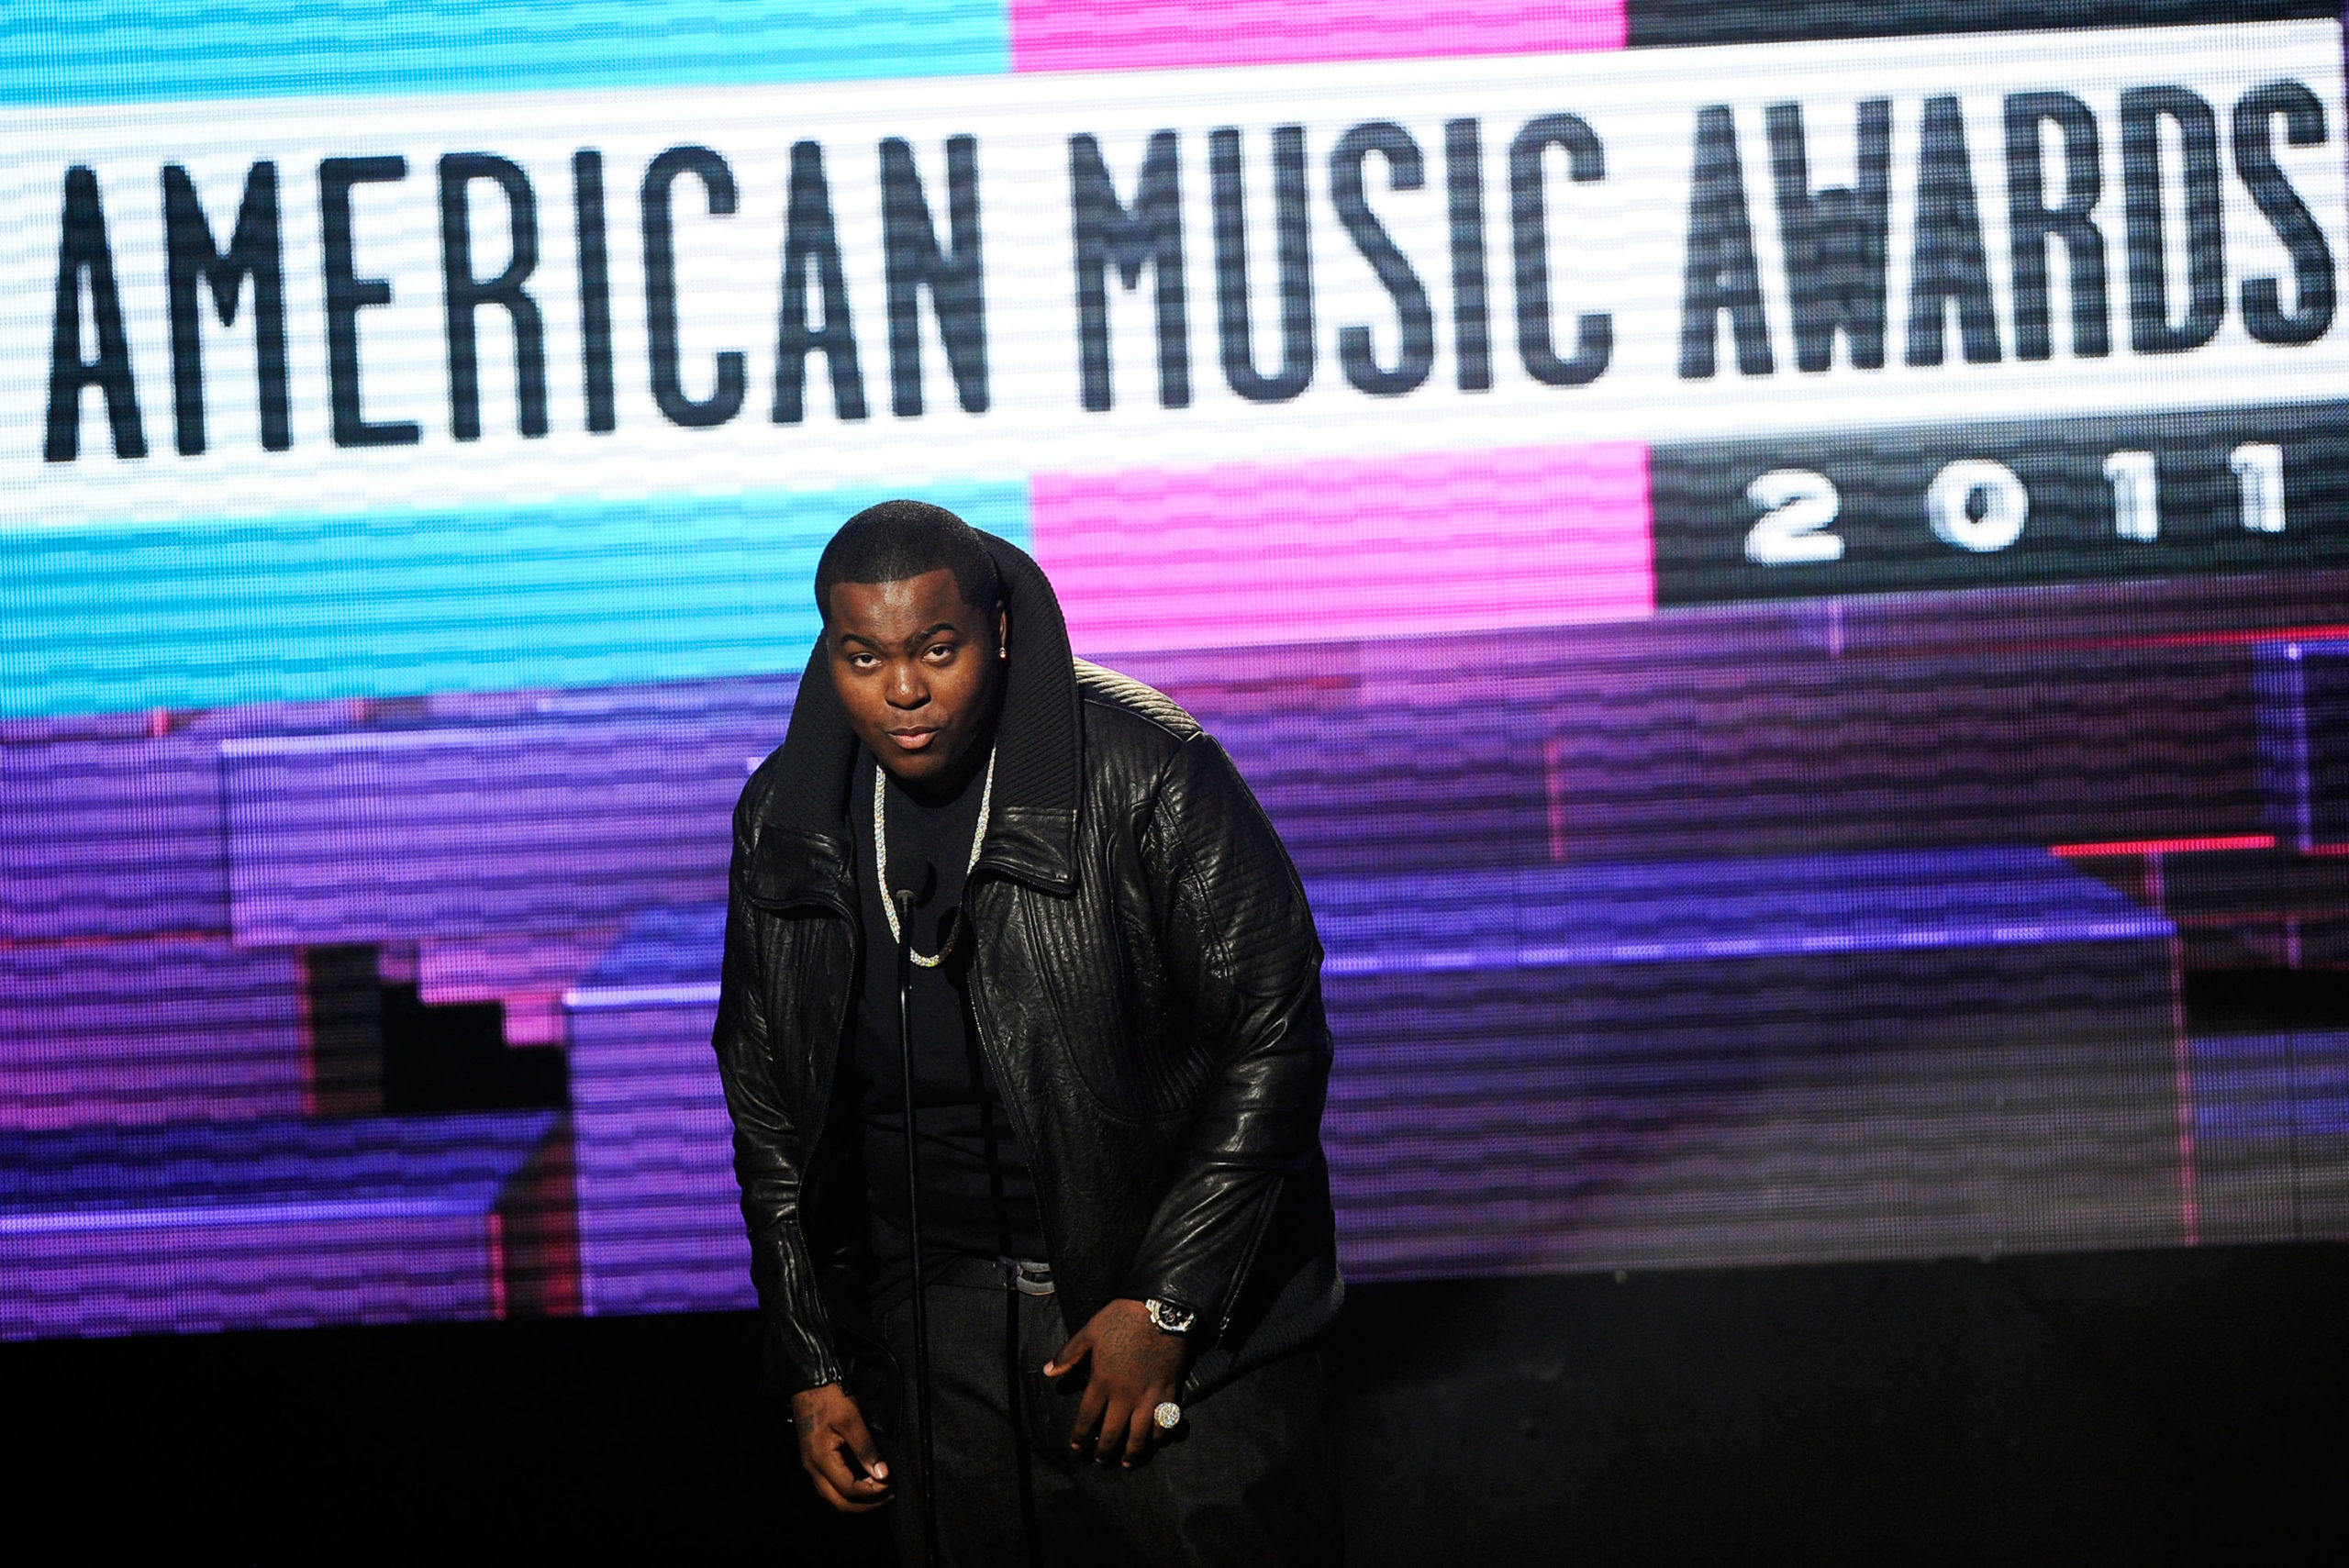 LOS ANGELES, CA - NOVEMBER 20: Singer Sean Kingston speaks onstage at the 2011 American Music Awards held at Nokia Theatre L.A. LIVE on November 20, 2011 in Los Angeles, California. (Photo by Kevork Djansezian/Getty Images)